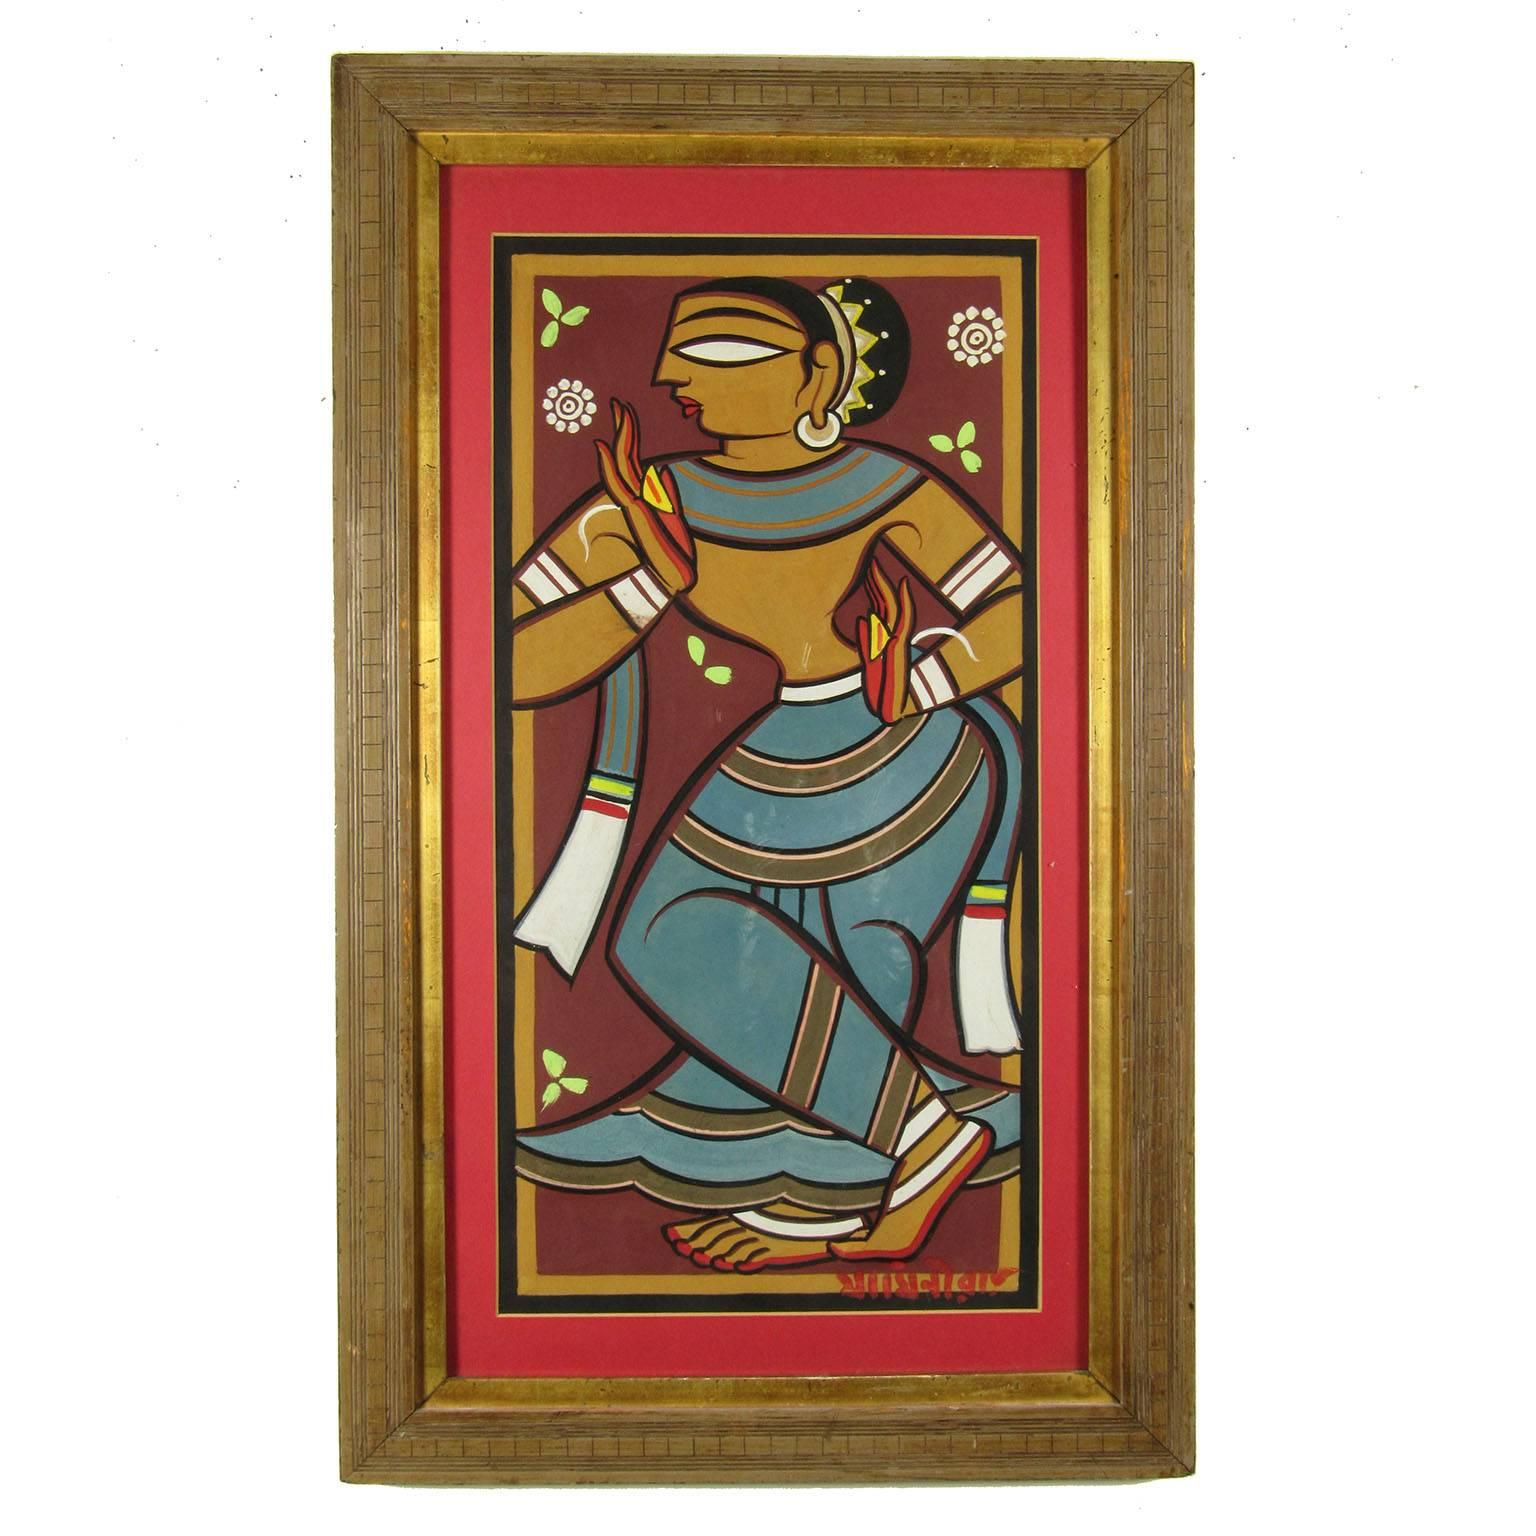 An original Jamini Roy (India, 1887-1972) gouache painting of a Gopini. Signed lower right and framed by Leo Rehfeld, New York. Sight: 21 x 10 1/2 inches. Framed: 27 3/4 x 16 3/4 inches.

Note: A Gopini is a Hindi name for a girl or girlfriend of